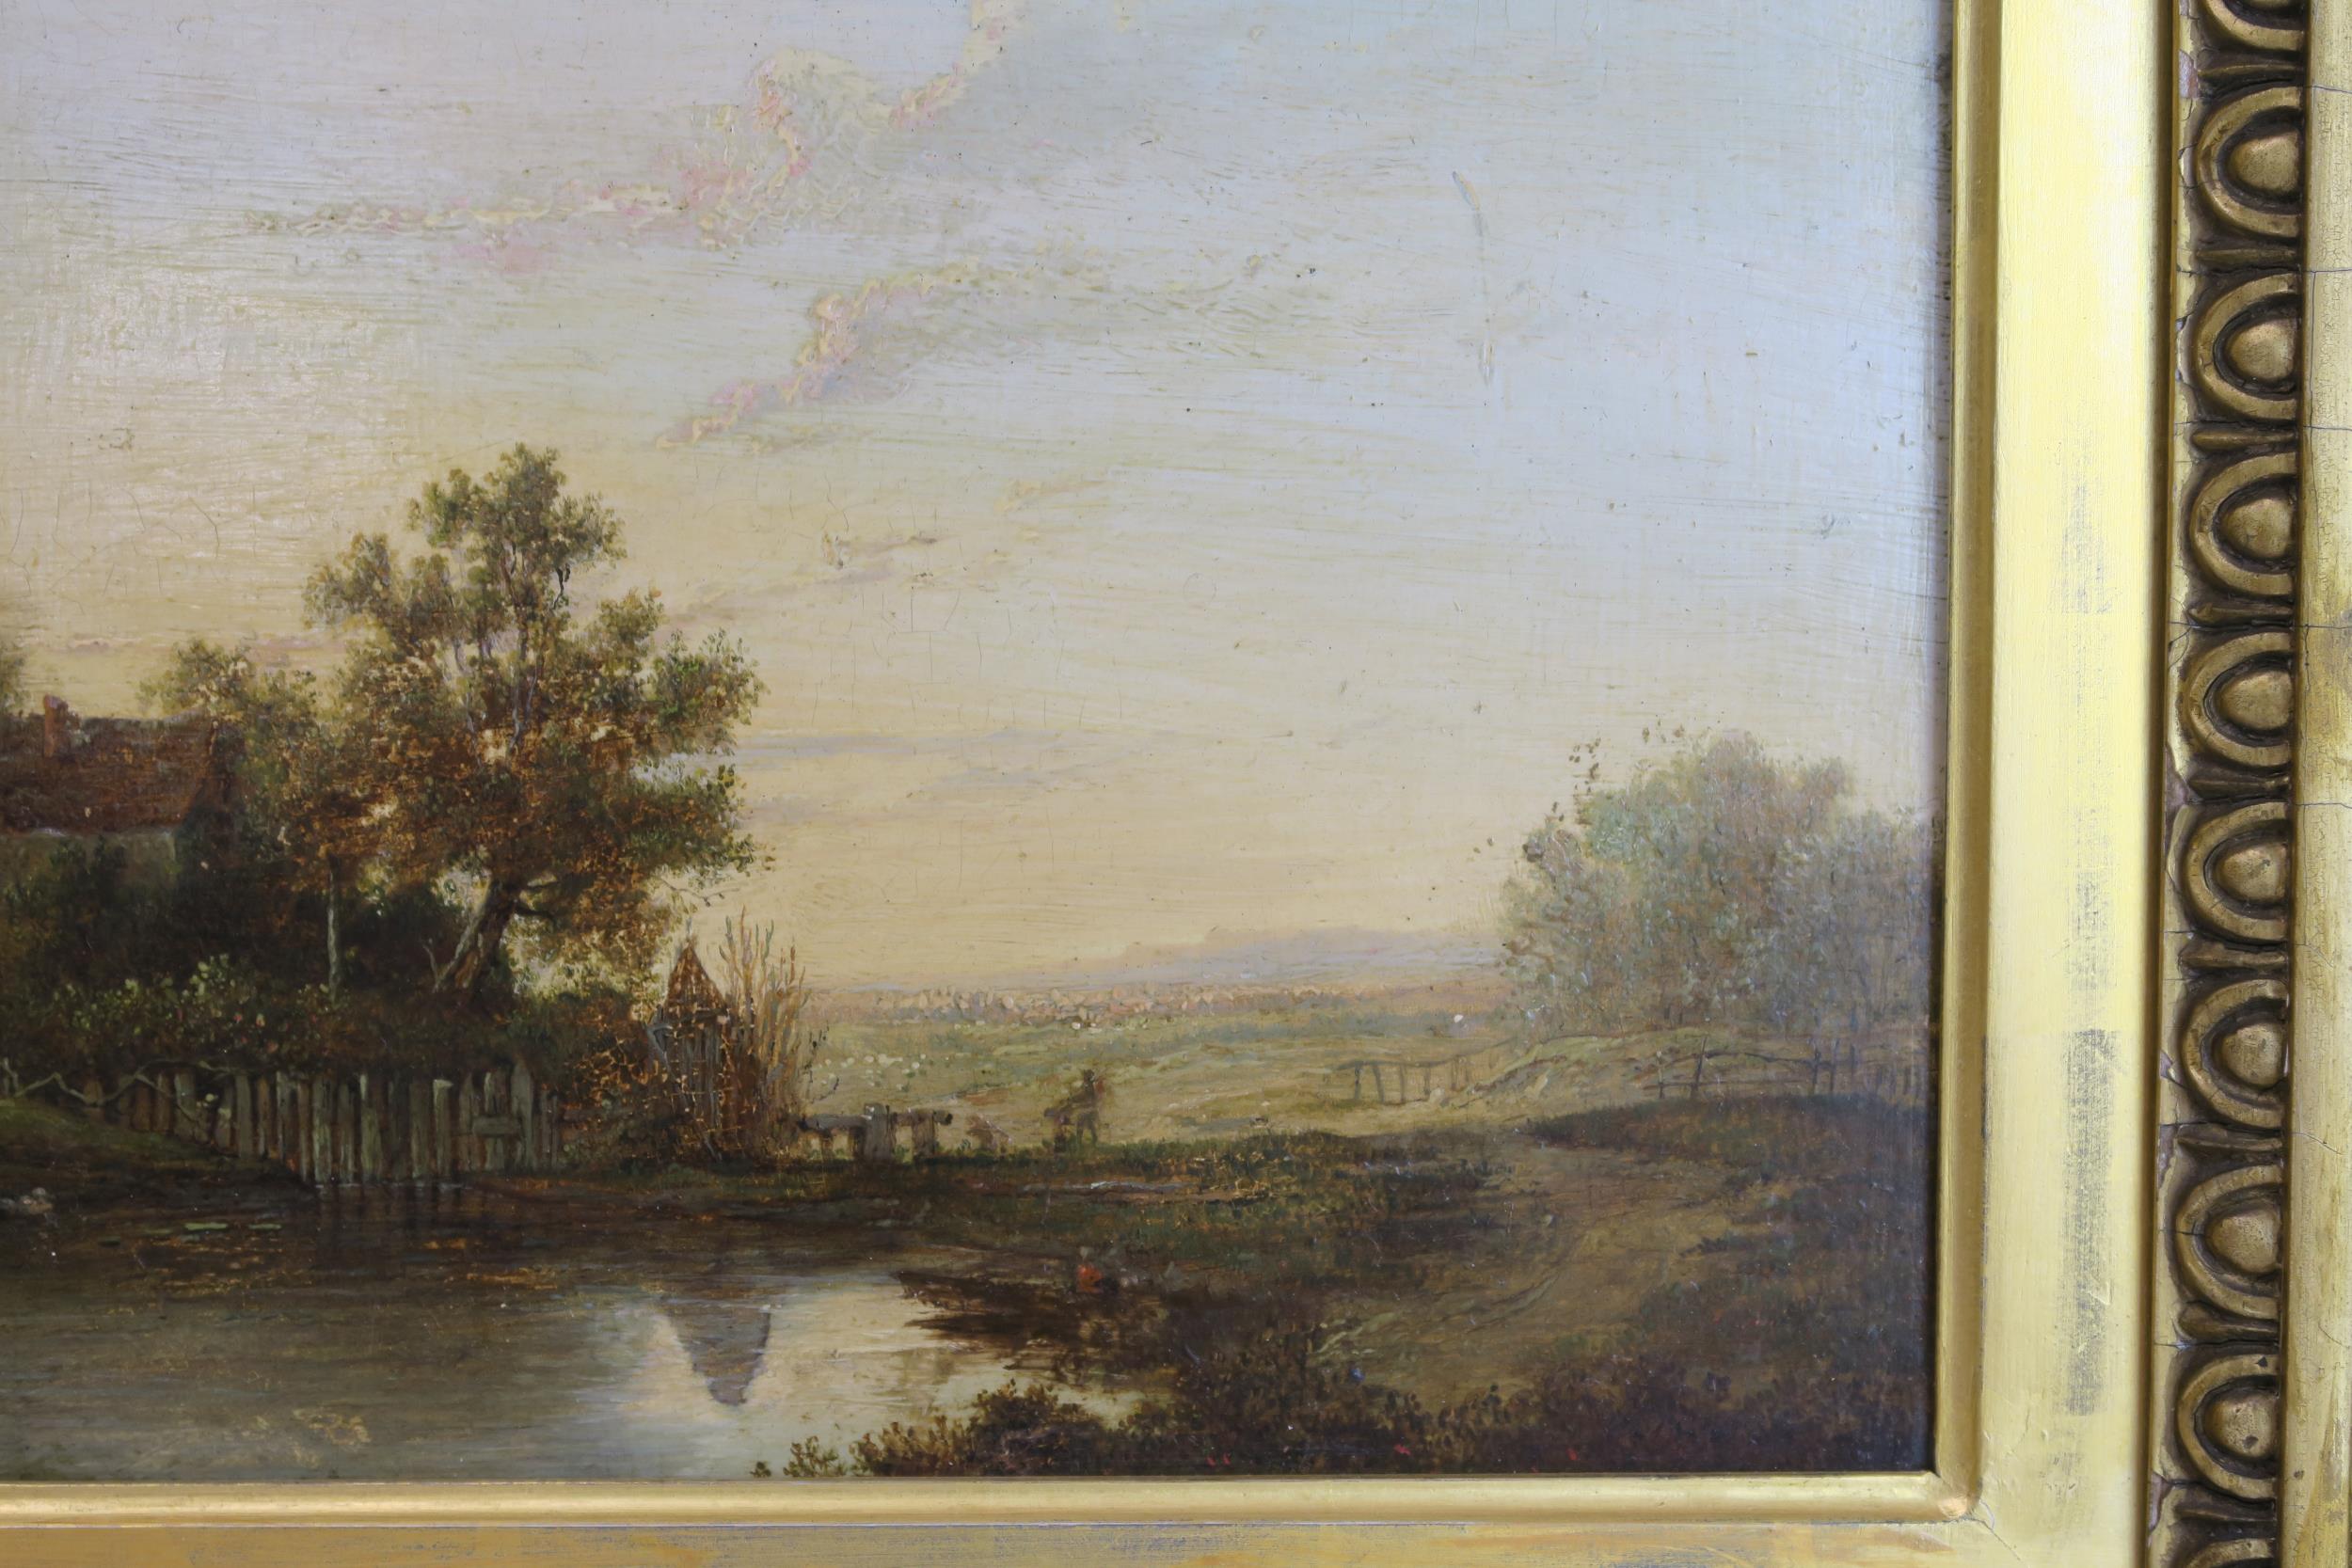 ATTRIBUTED TO PATRICK NASMYTH (SCOTTISH 1787-1831) MILL LANDSCAPE WITH DISTANT TOWN  Oil on panel, - Image 6 of 8